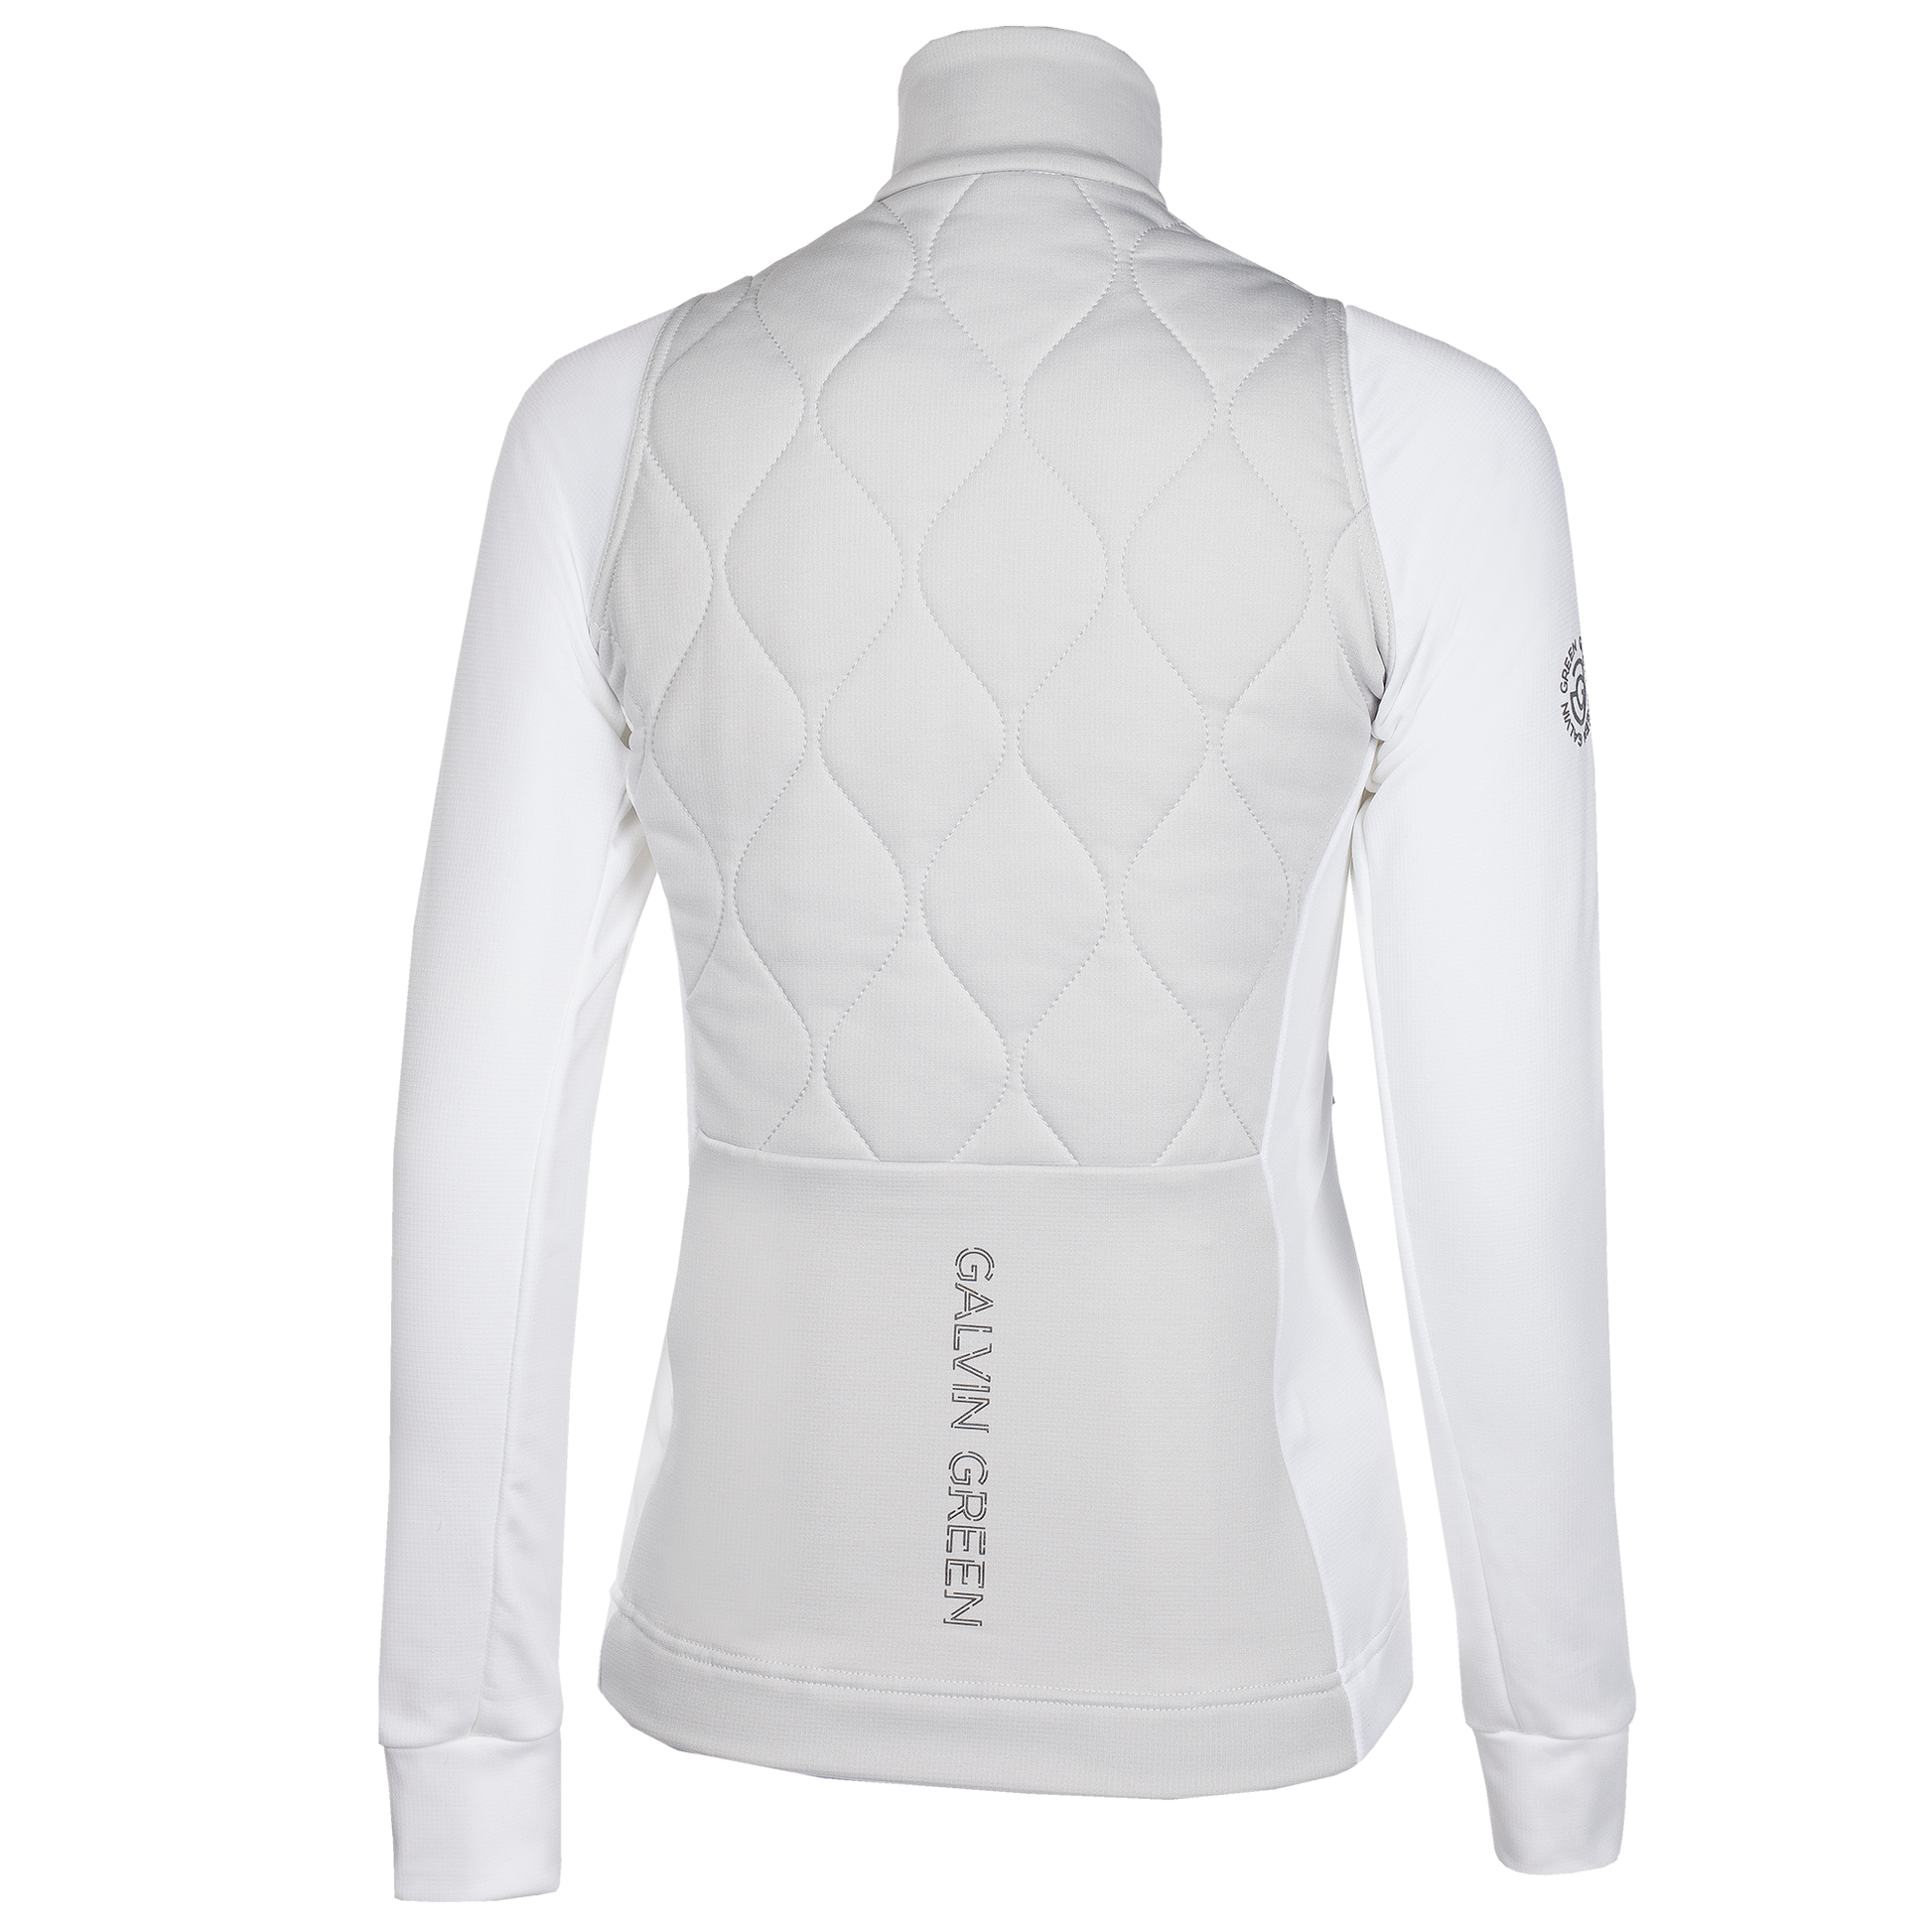 Galvin Green Ladies Insulating Mid-Layer Jacket In Cool Grey And White